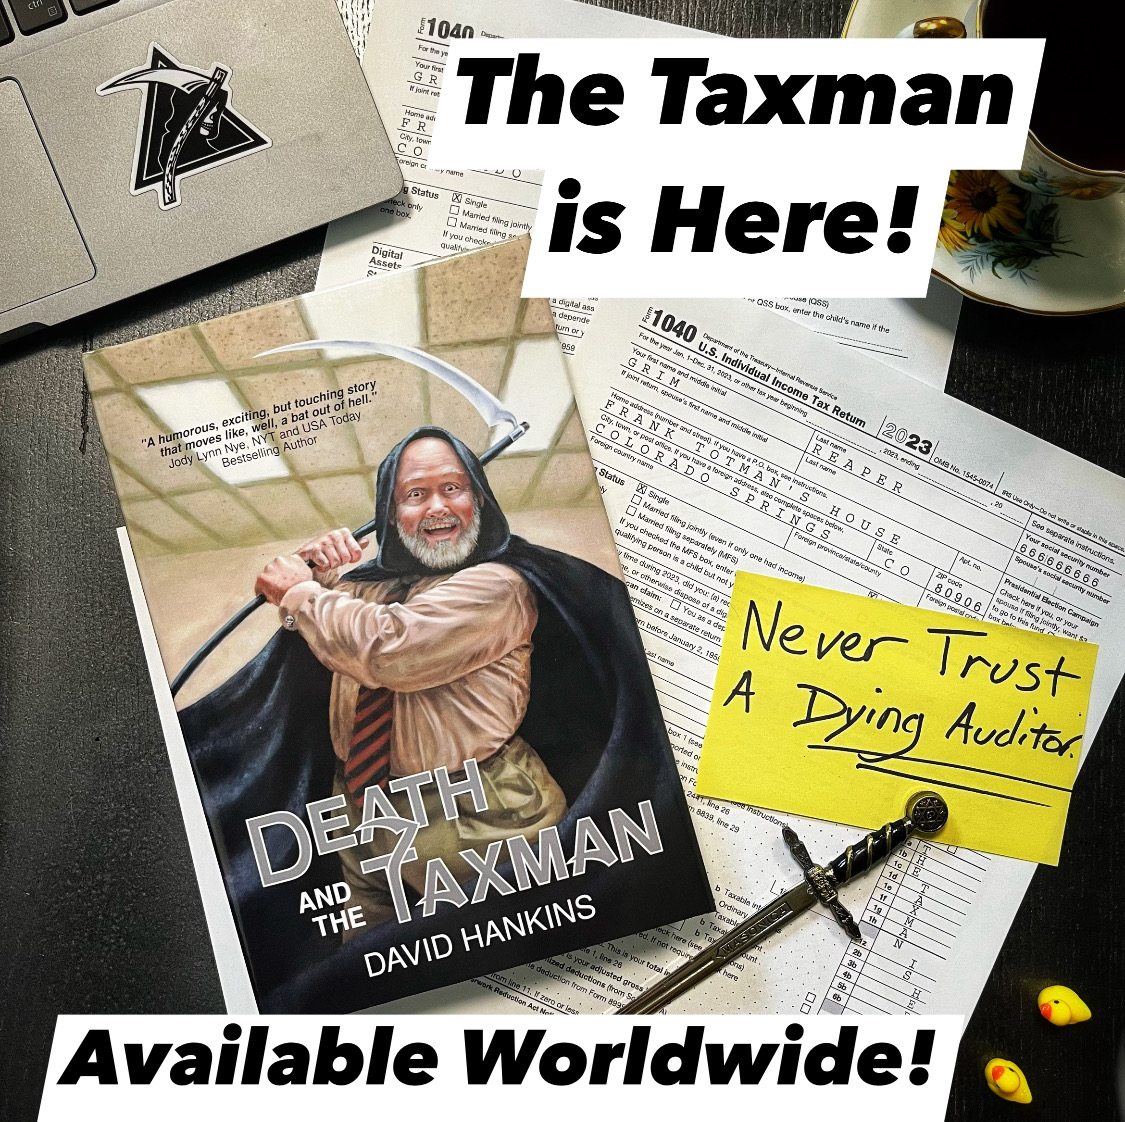 @Sirvinya Thrilled to have entered #SPFBOX with my new release Death and the Taxman. Fingers crossed!

The Grim Reaper, trapped in an IRS agent's dying body, has to regain his powers before he dies and faces judgment for his original sin.

books2read.com/deathandthetax…

#deathandthetaxman